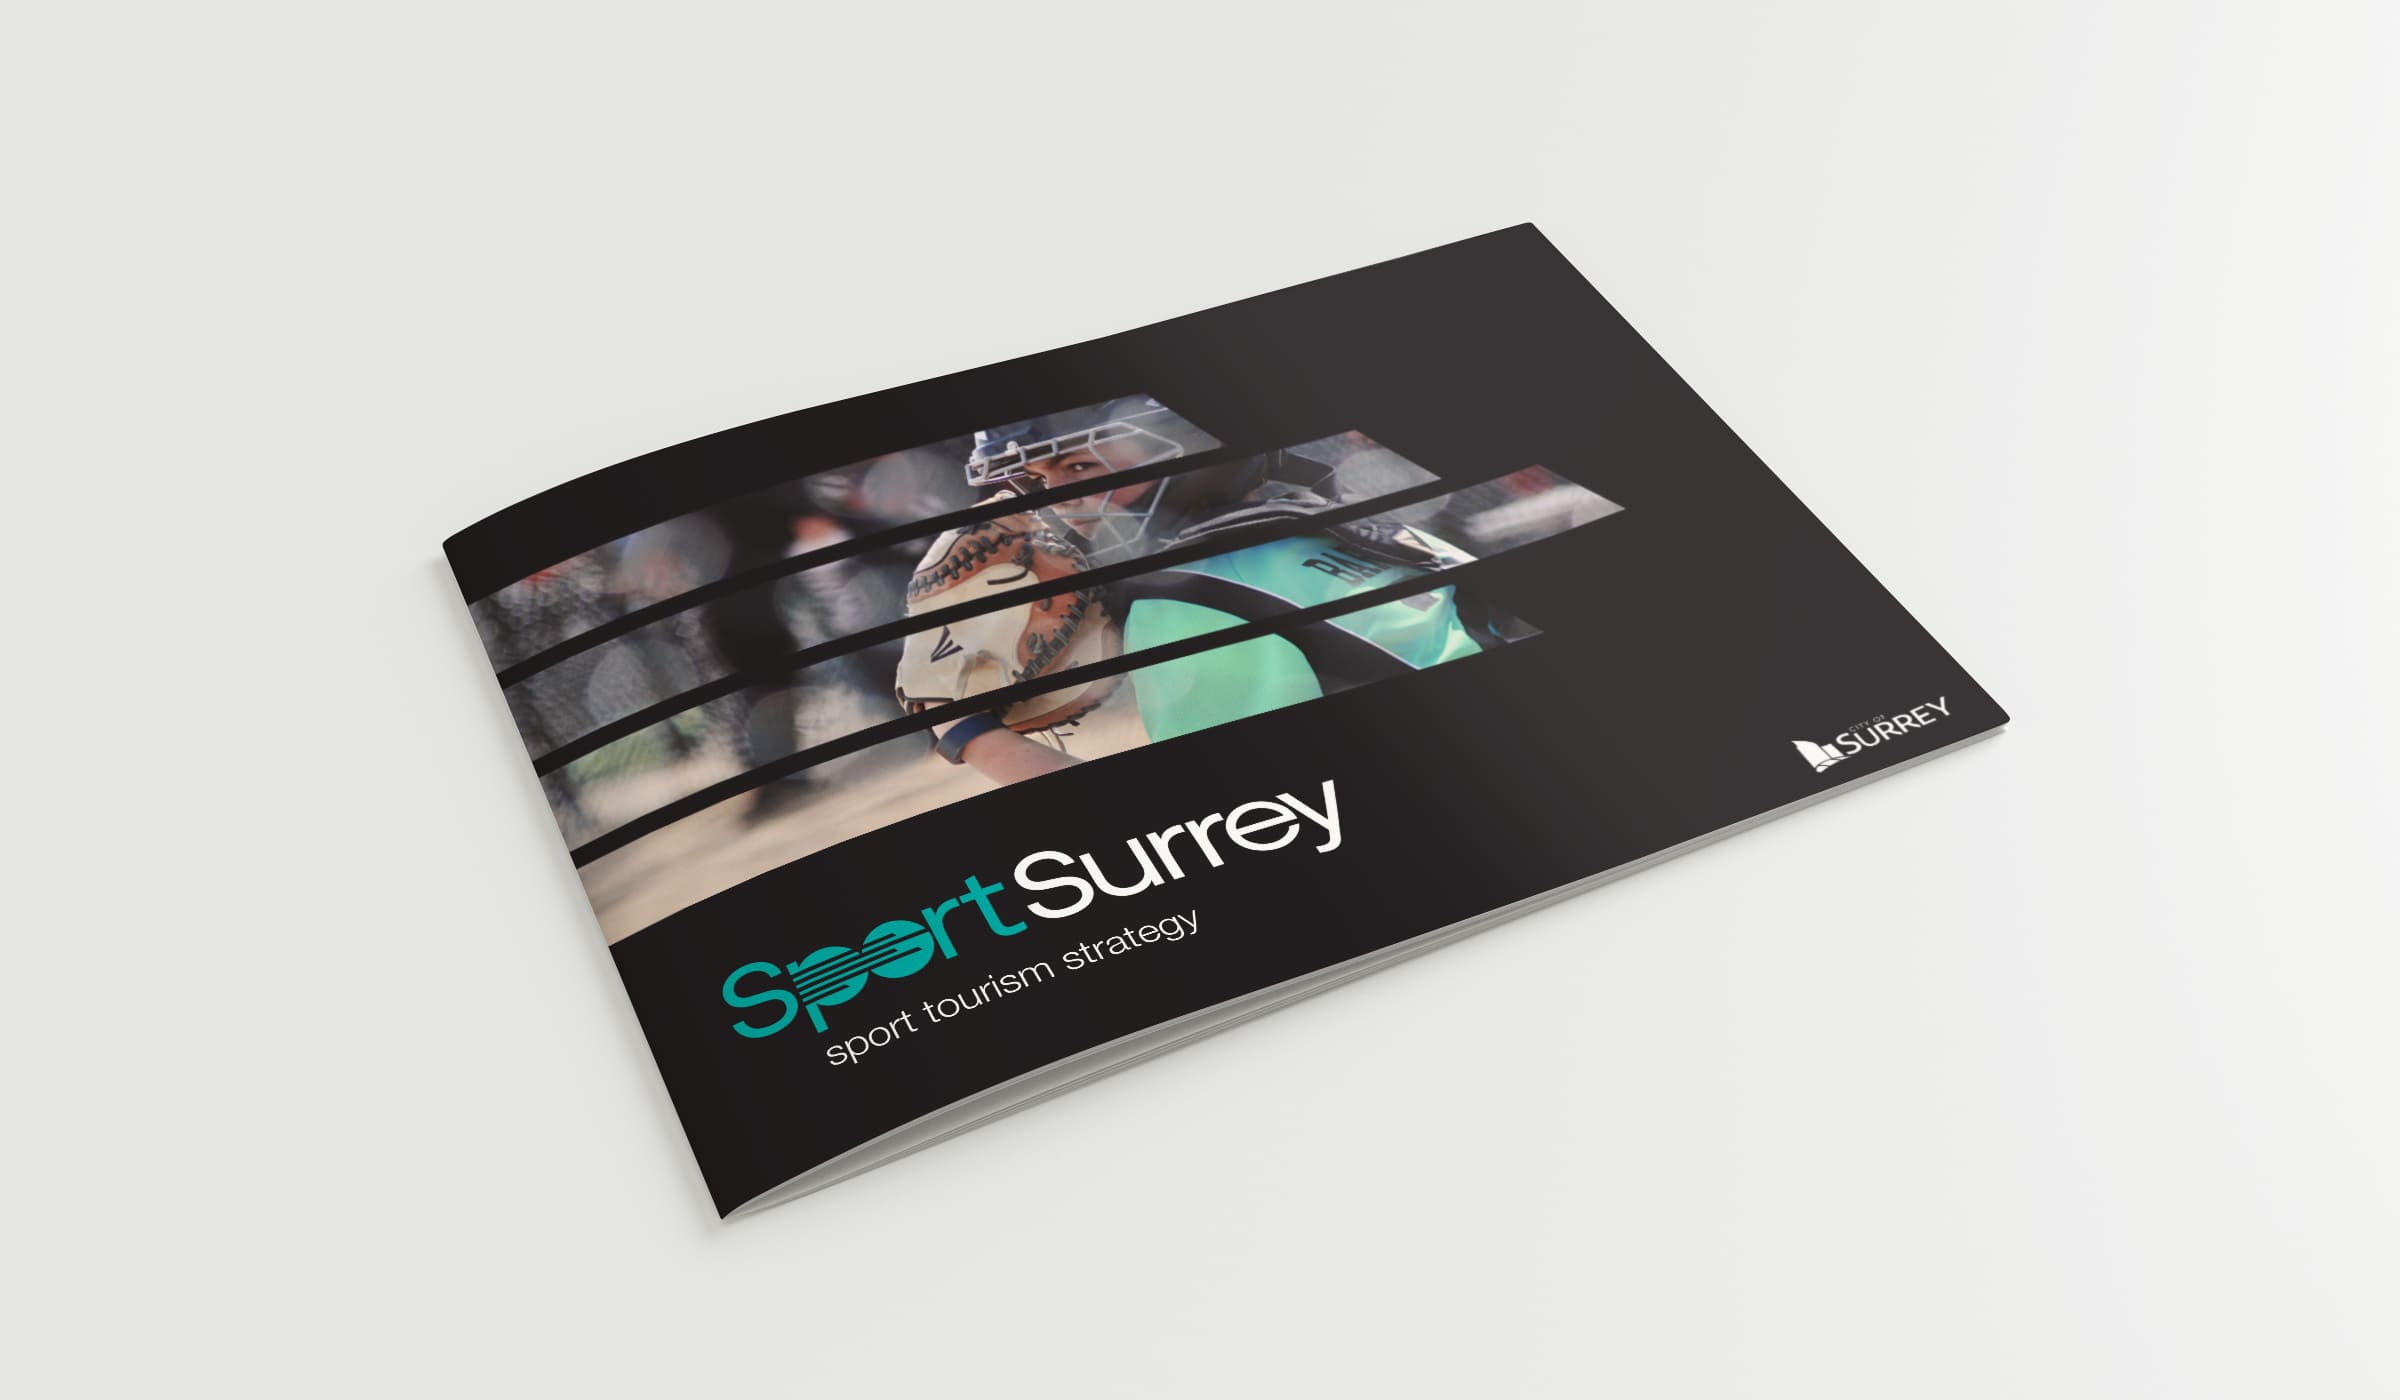 Sport Surrey's refreshed book/brochure cover page